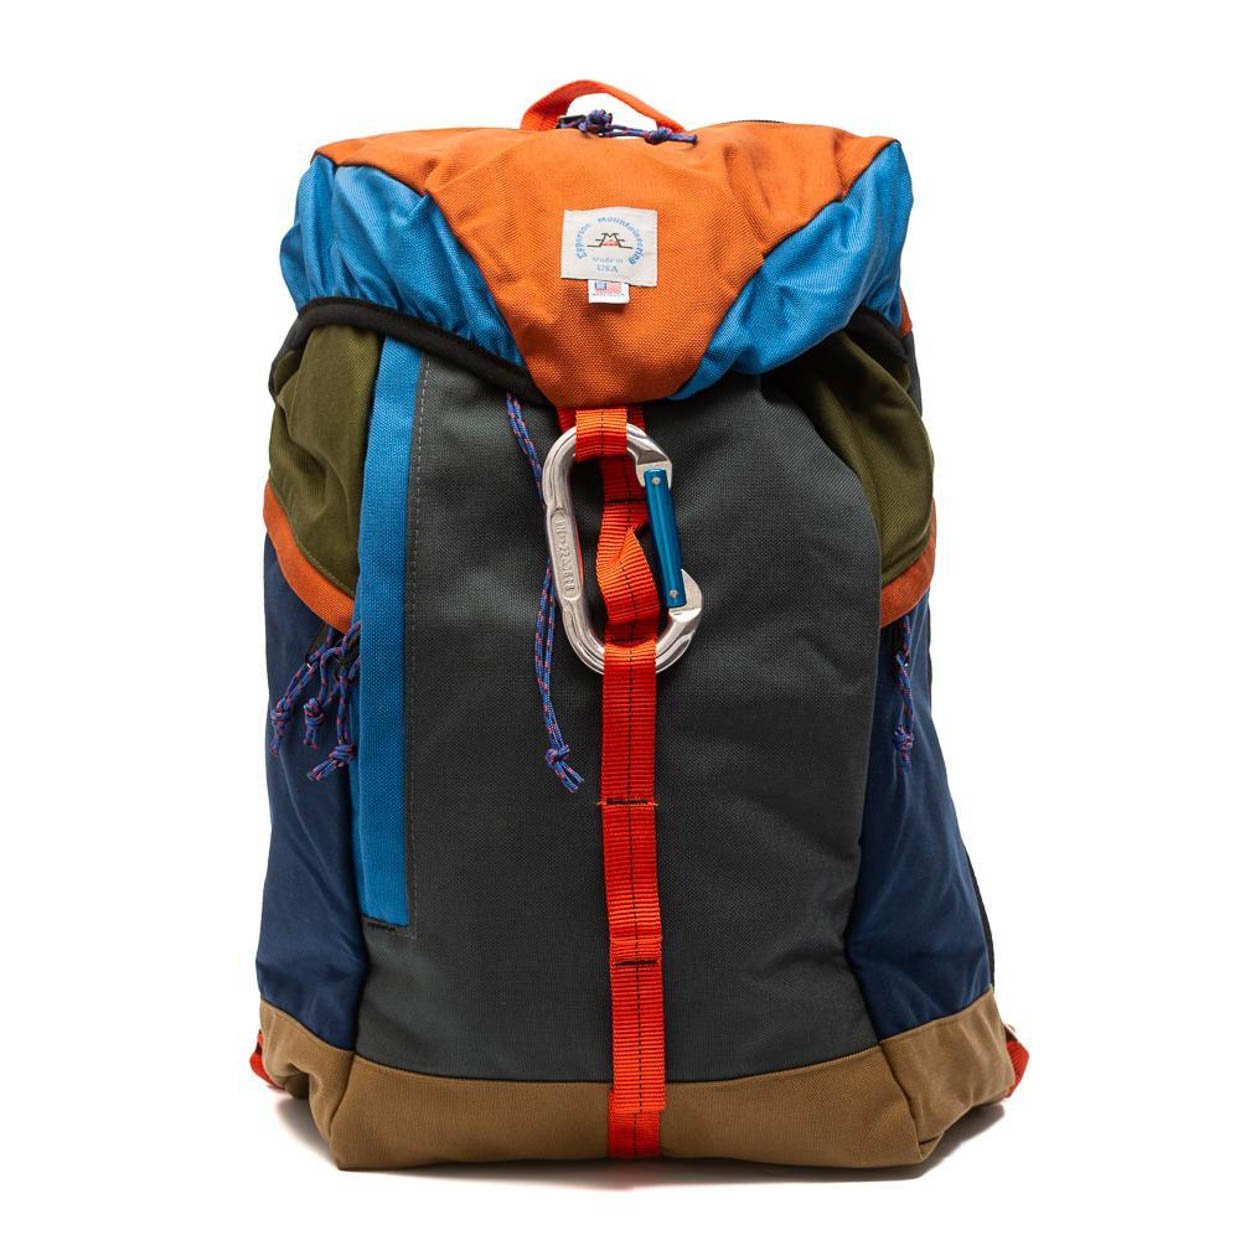 Epperson Mountaineering Large Climb Pack Holds Closed with a Carabiner